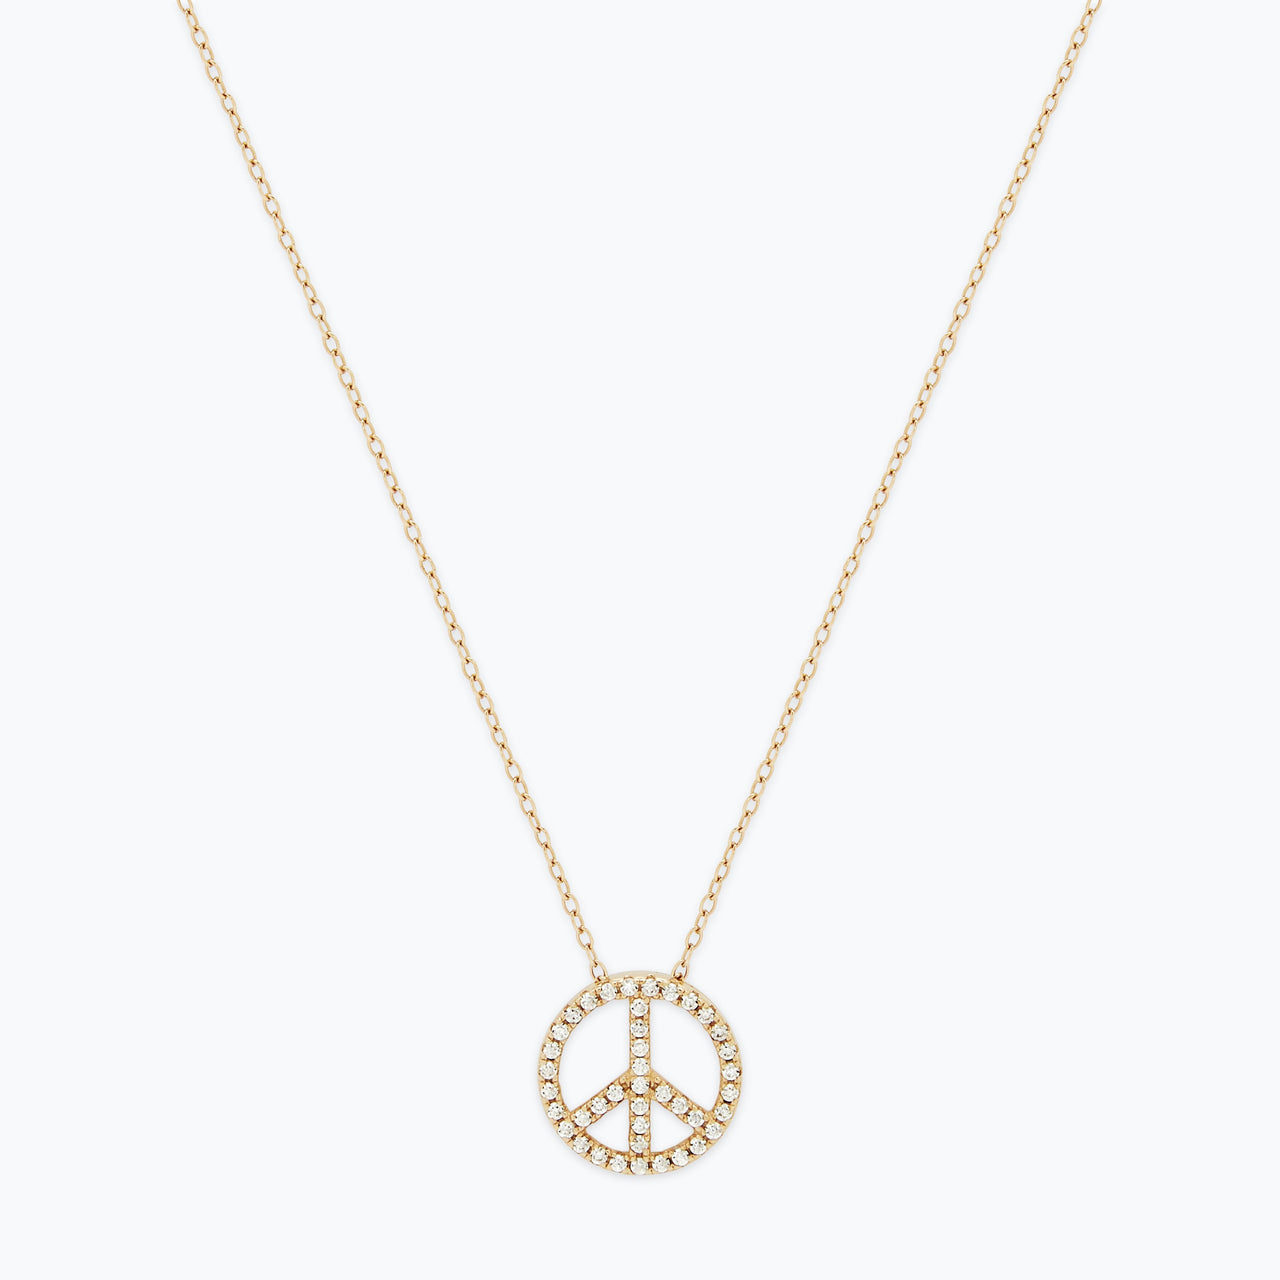 PHYLLIS & ROSIE ANGEL NECKLACE - YELLOW GOLD